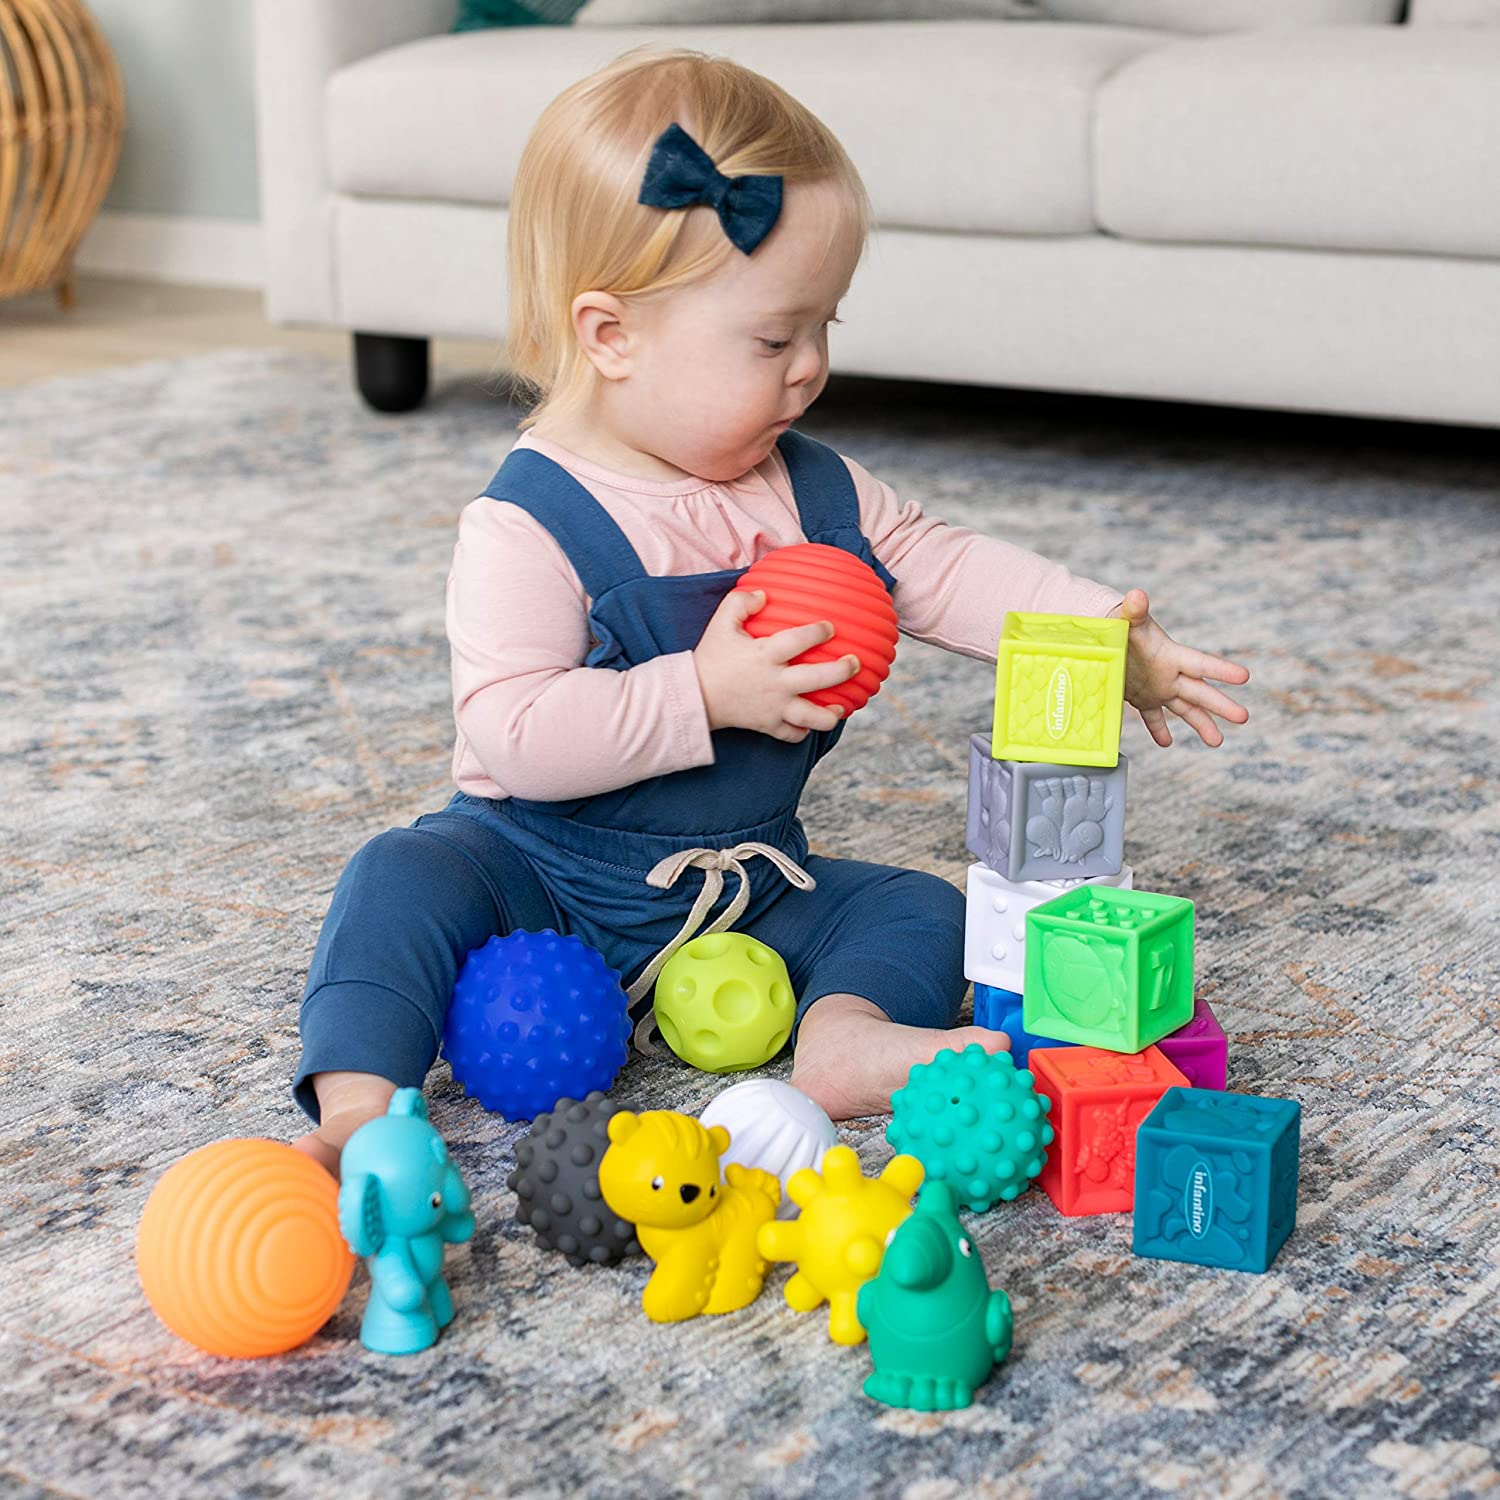 Infantino Sensory Balls Blocks & Buddies - 20 piece basics set for sensory exploration, fine and gross motor skill development and early introduction to colors, counting, sorting and numbers